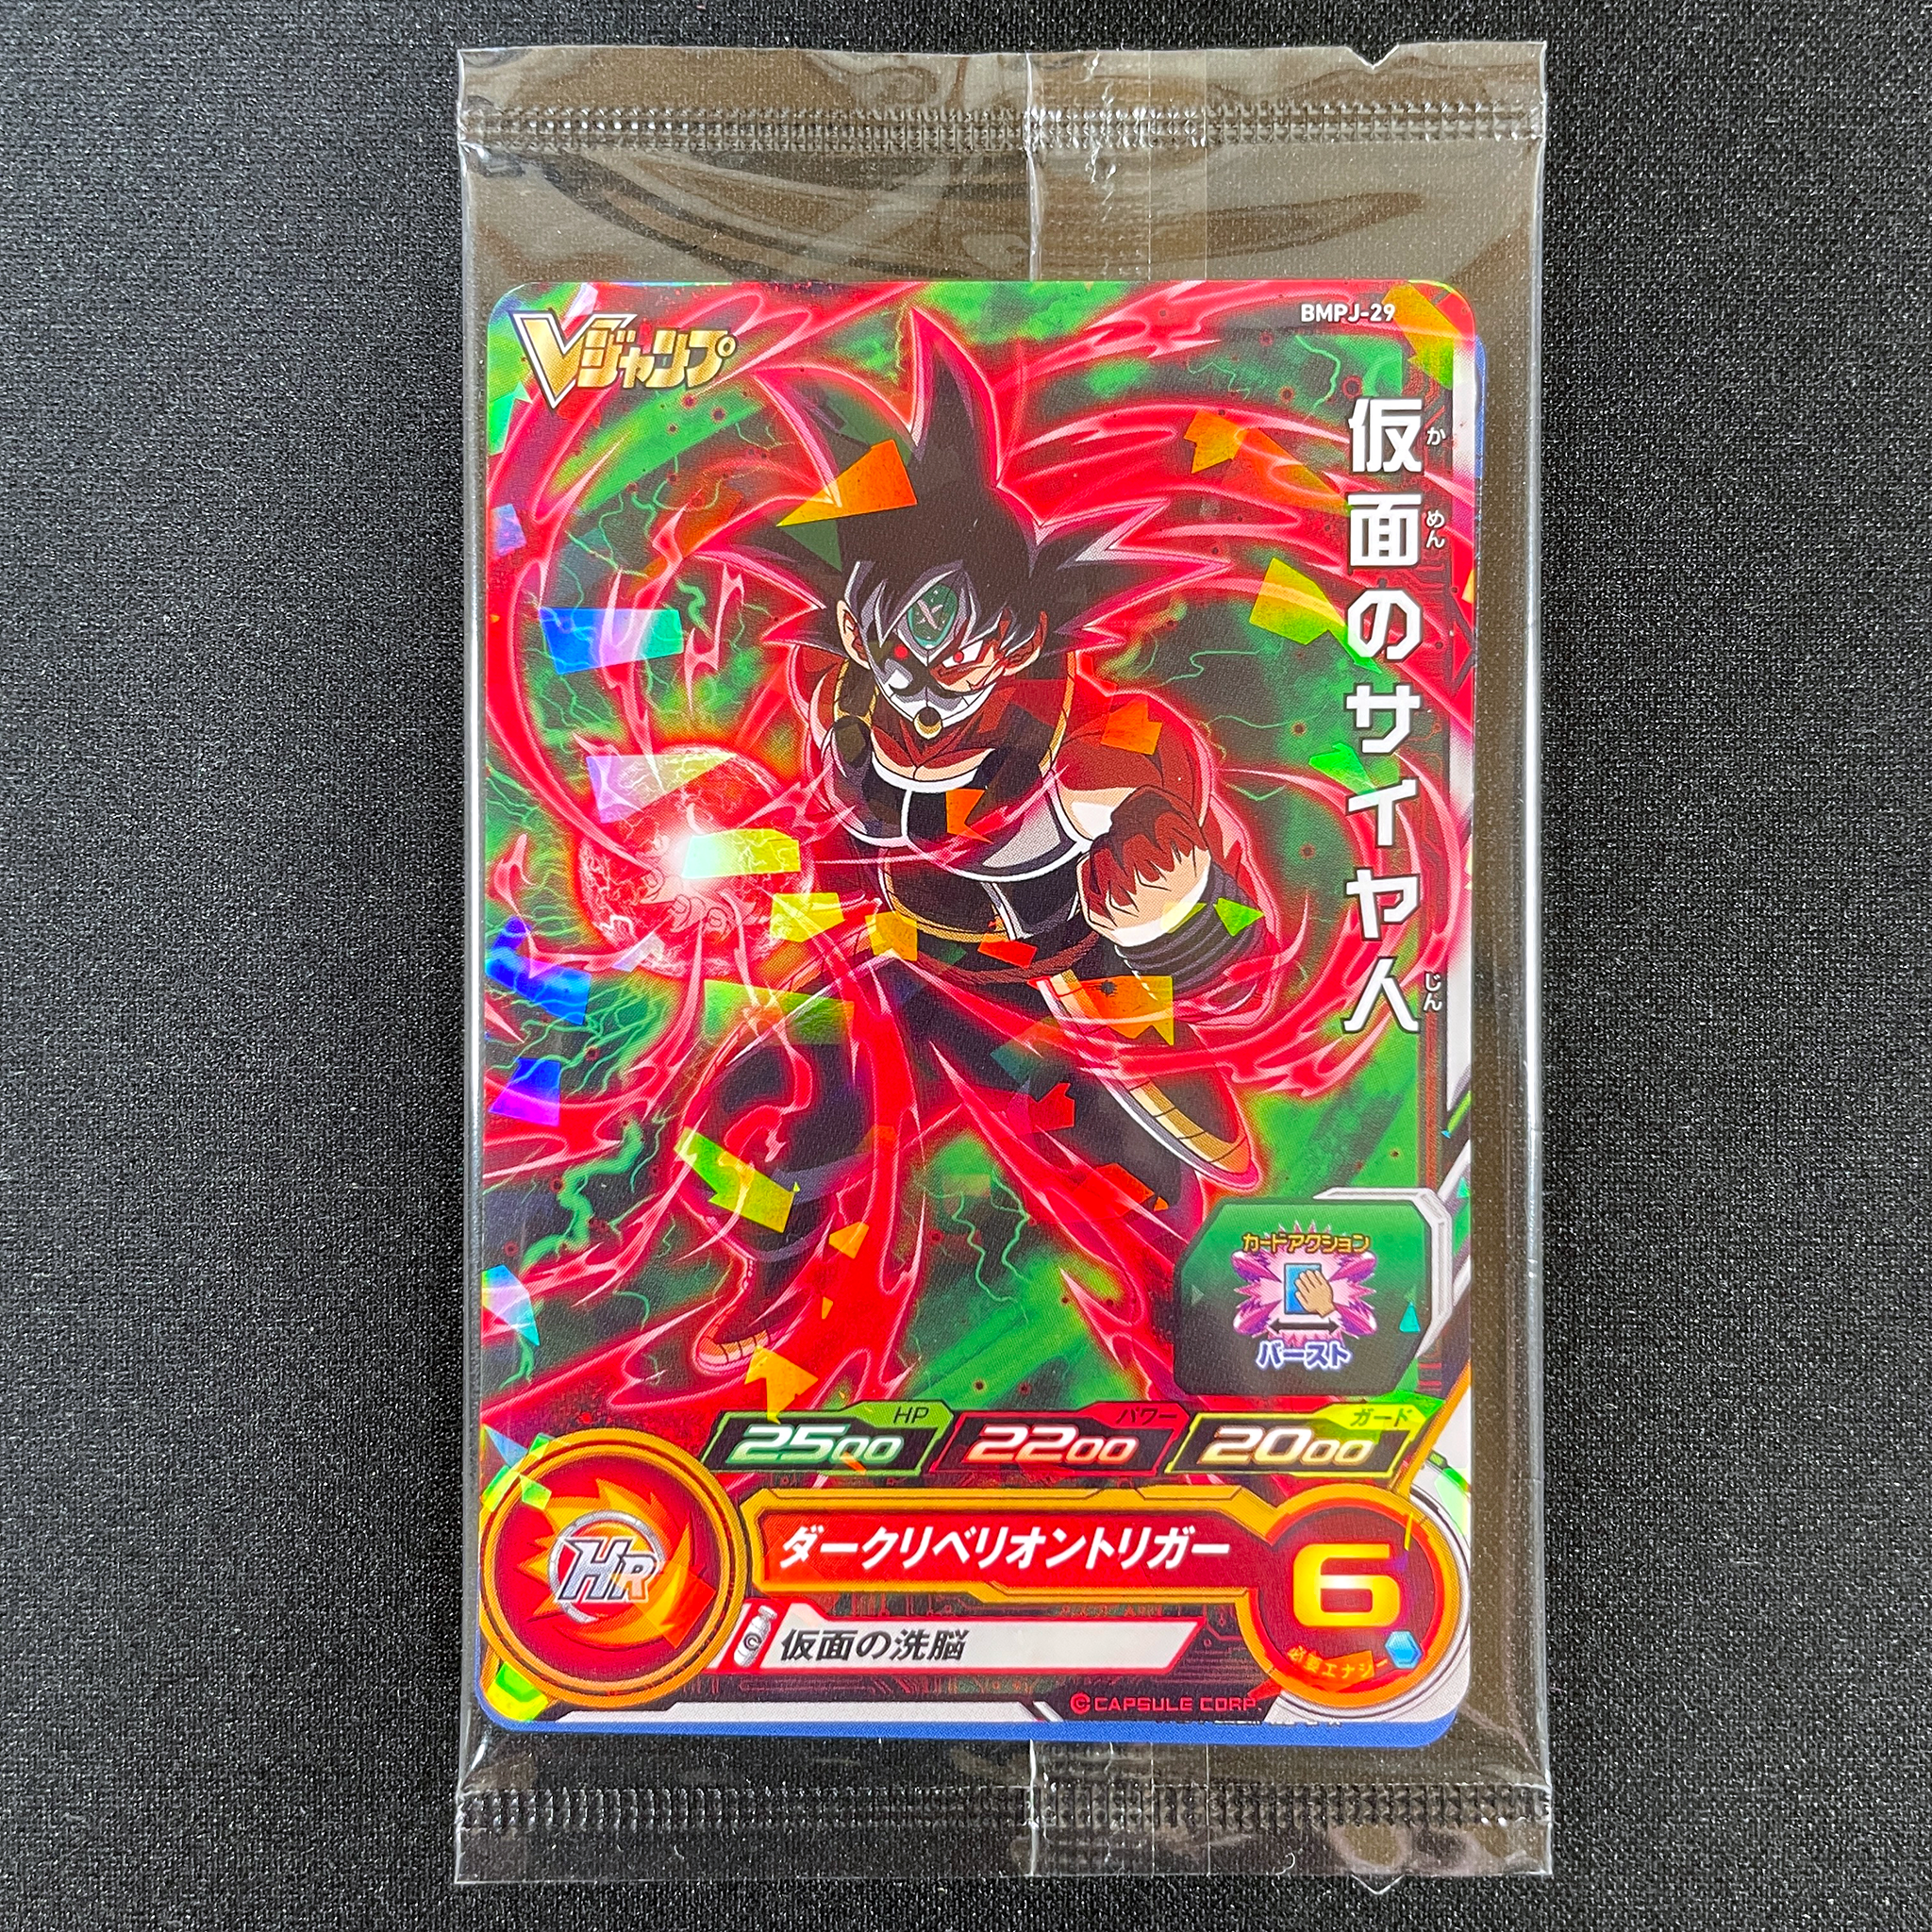 SUPER DRAGON BALL HEROES BMPJ-29 & BMPJ-30 in blister  Promotional card given to the 2021 annual subscribers of the V JUMP magazine.  March / April (?) 2021  BMPJ-29 Kamen no Saiyajin  BMPJ-30 Ankoku Kamen Ou